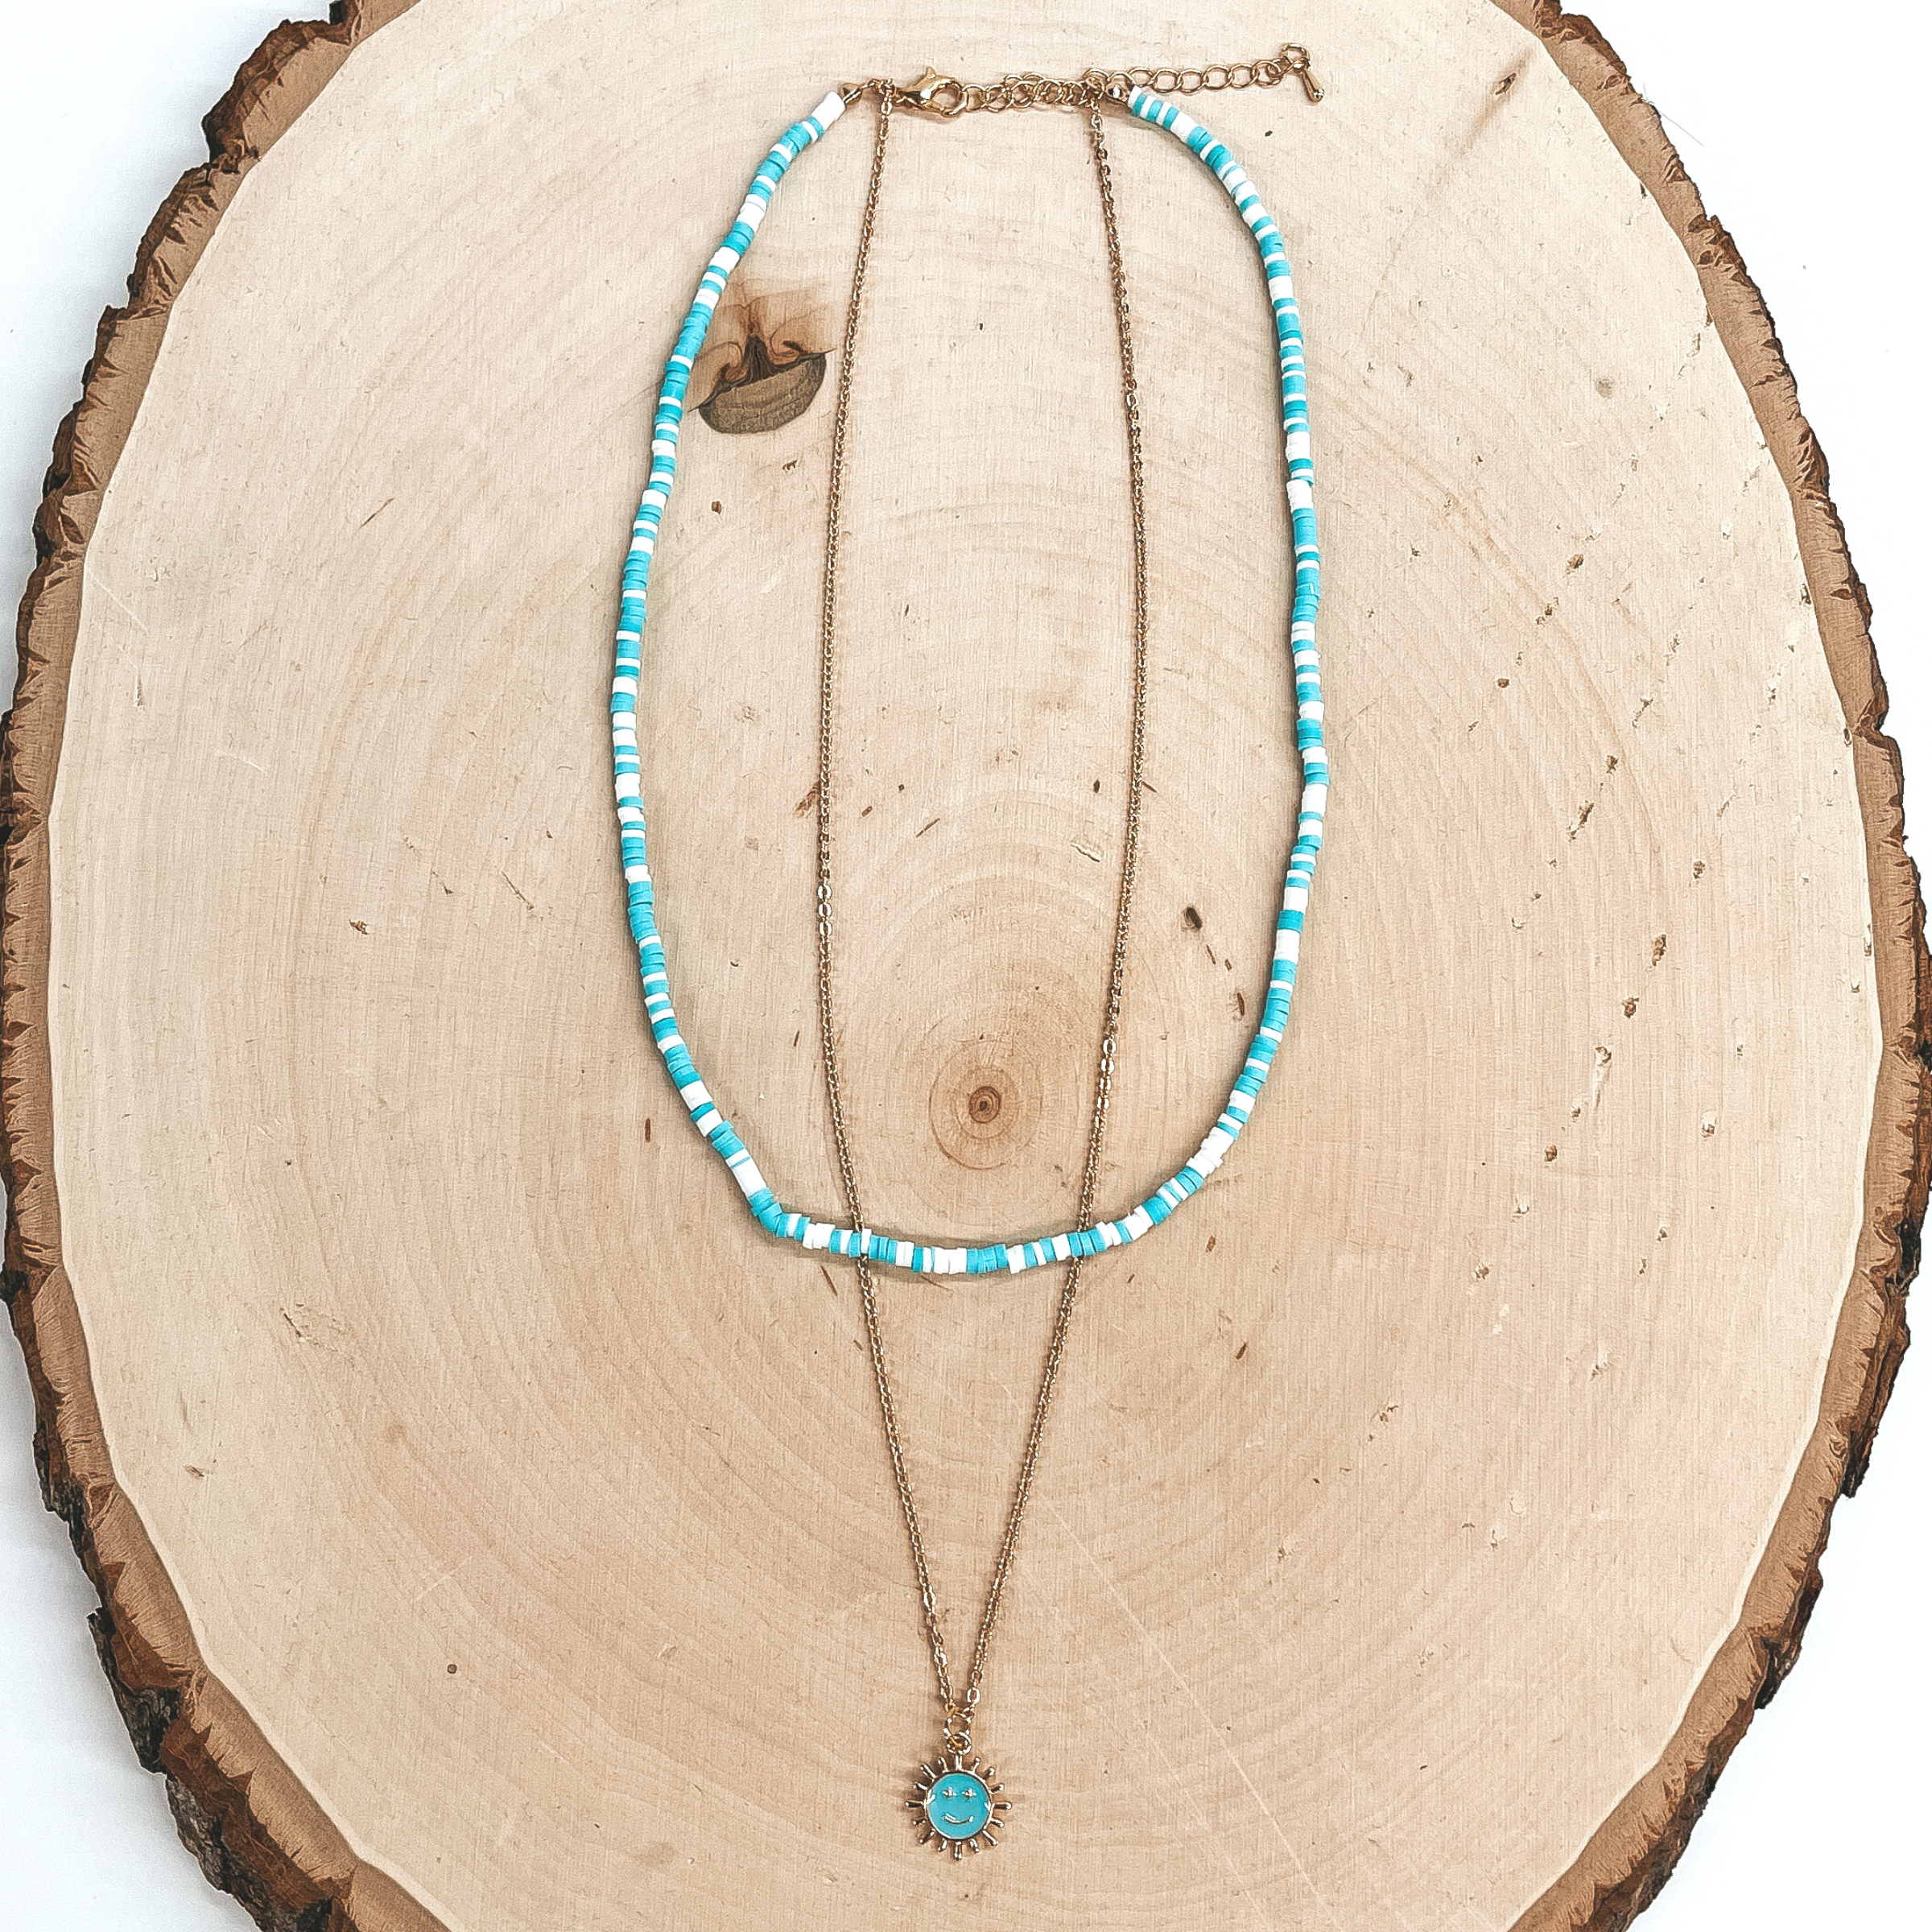 This is a double layered necklace the smaller  necklace has rubber beads in white and turquoise.  The bigger necklace is a small gold chain with a  turquoise sun pendant with a happy face. This  necklace is taken on a slab of wood and a white  background.